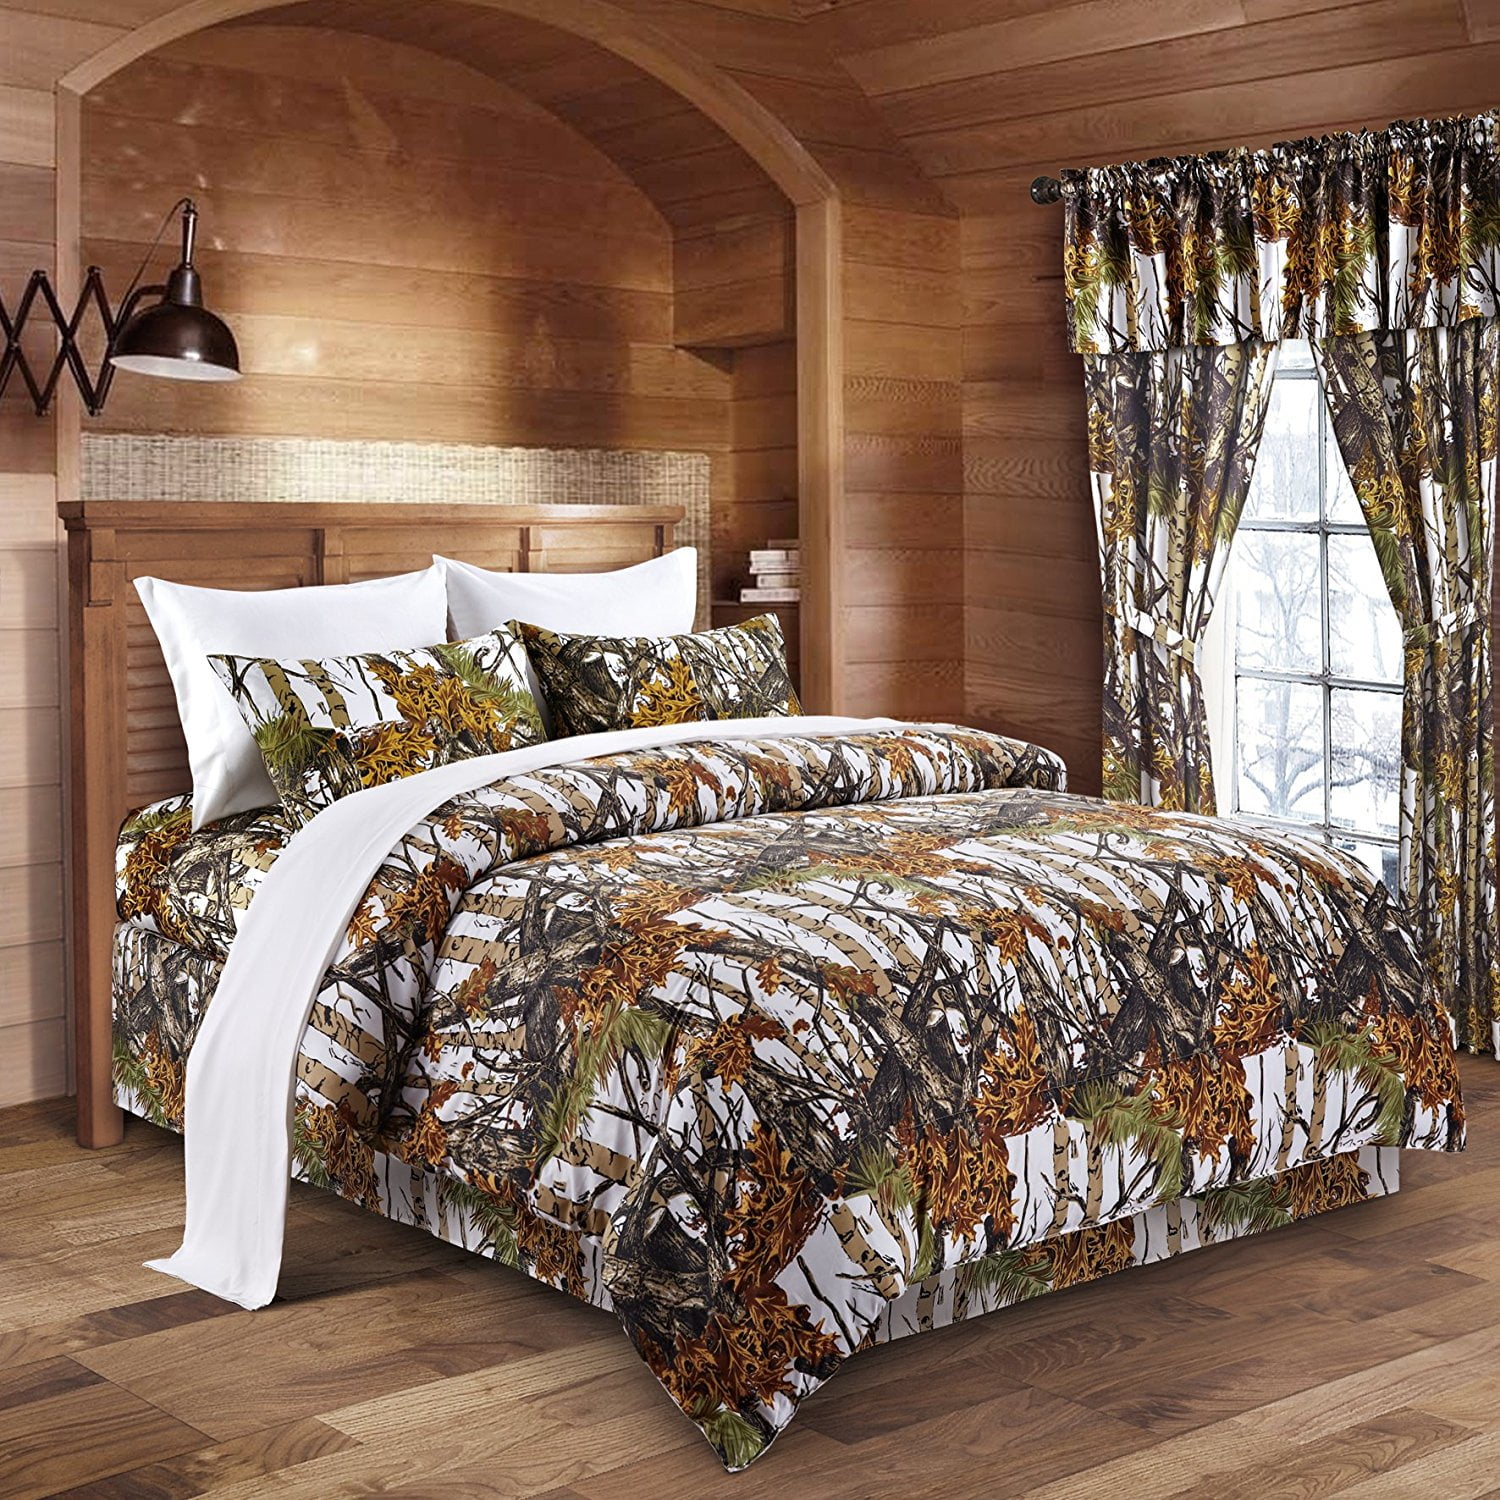 Details about   WHITE CAMO SHEET FULL SIZE WOODS CAMO BEDDING 6 SET BED CAMOUFLAGE FLAT FITTED 